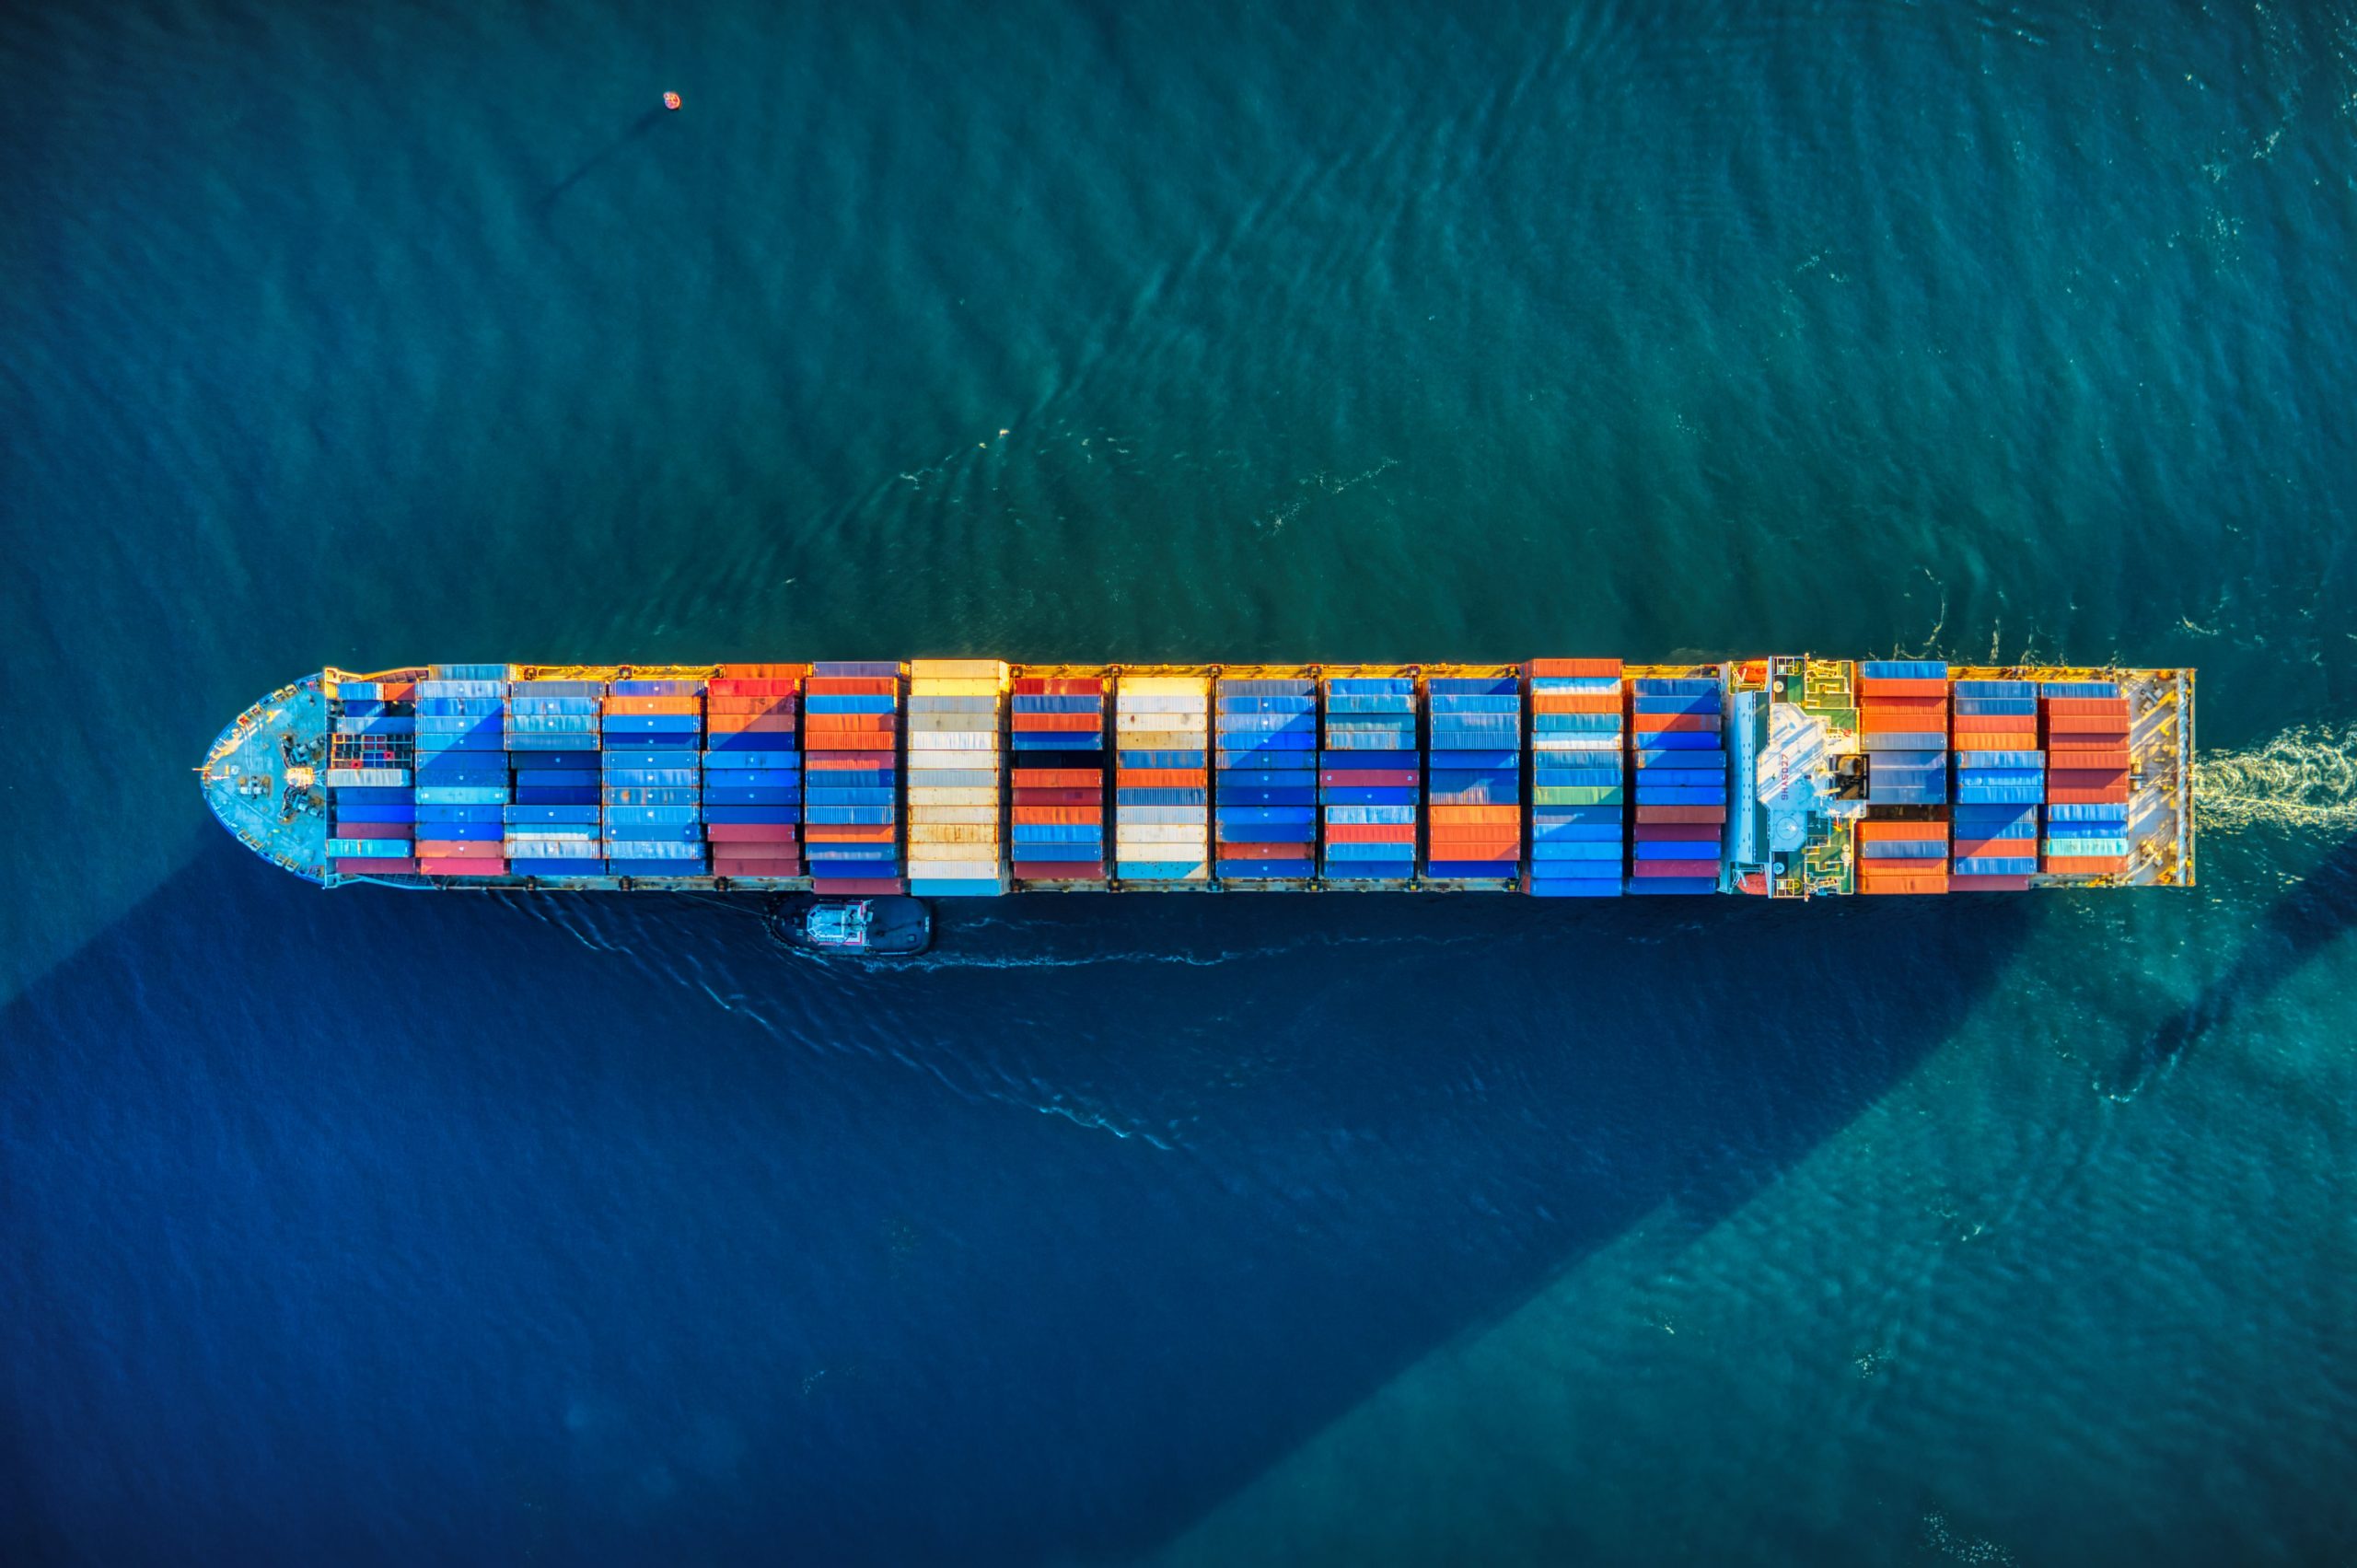 Arial photo of ship at sea with containers on deck